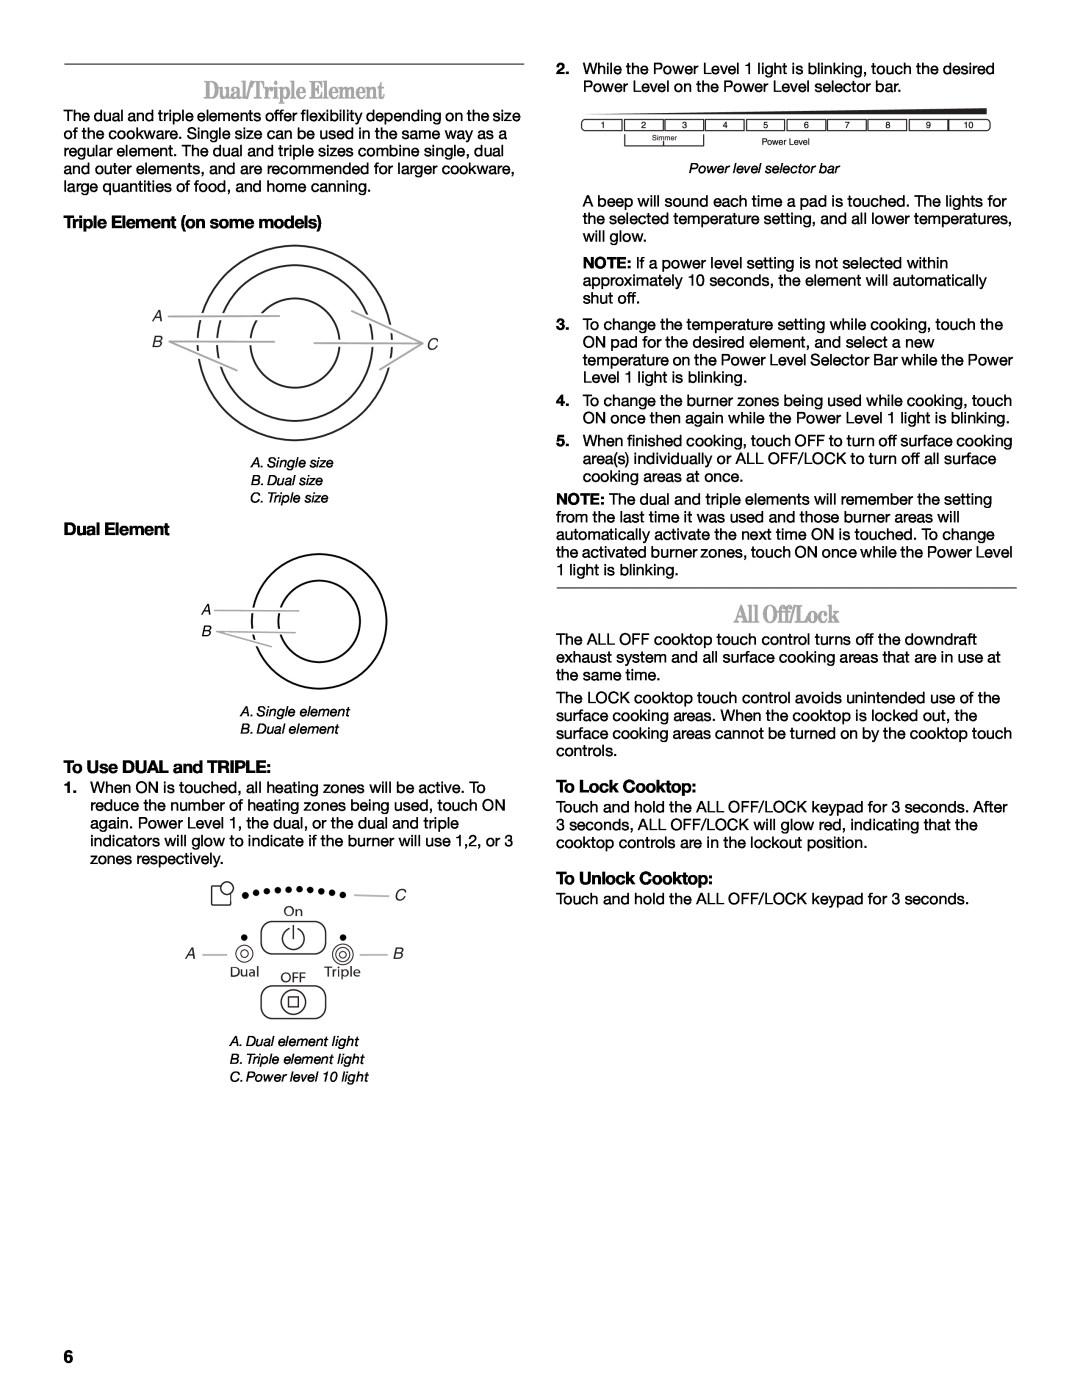 Whirlpool G9CE3065XB Dual/TripleElement, All Off/Lock, Triple Element on some models, Dual Element, To Use DUAL and TRIPLE 